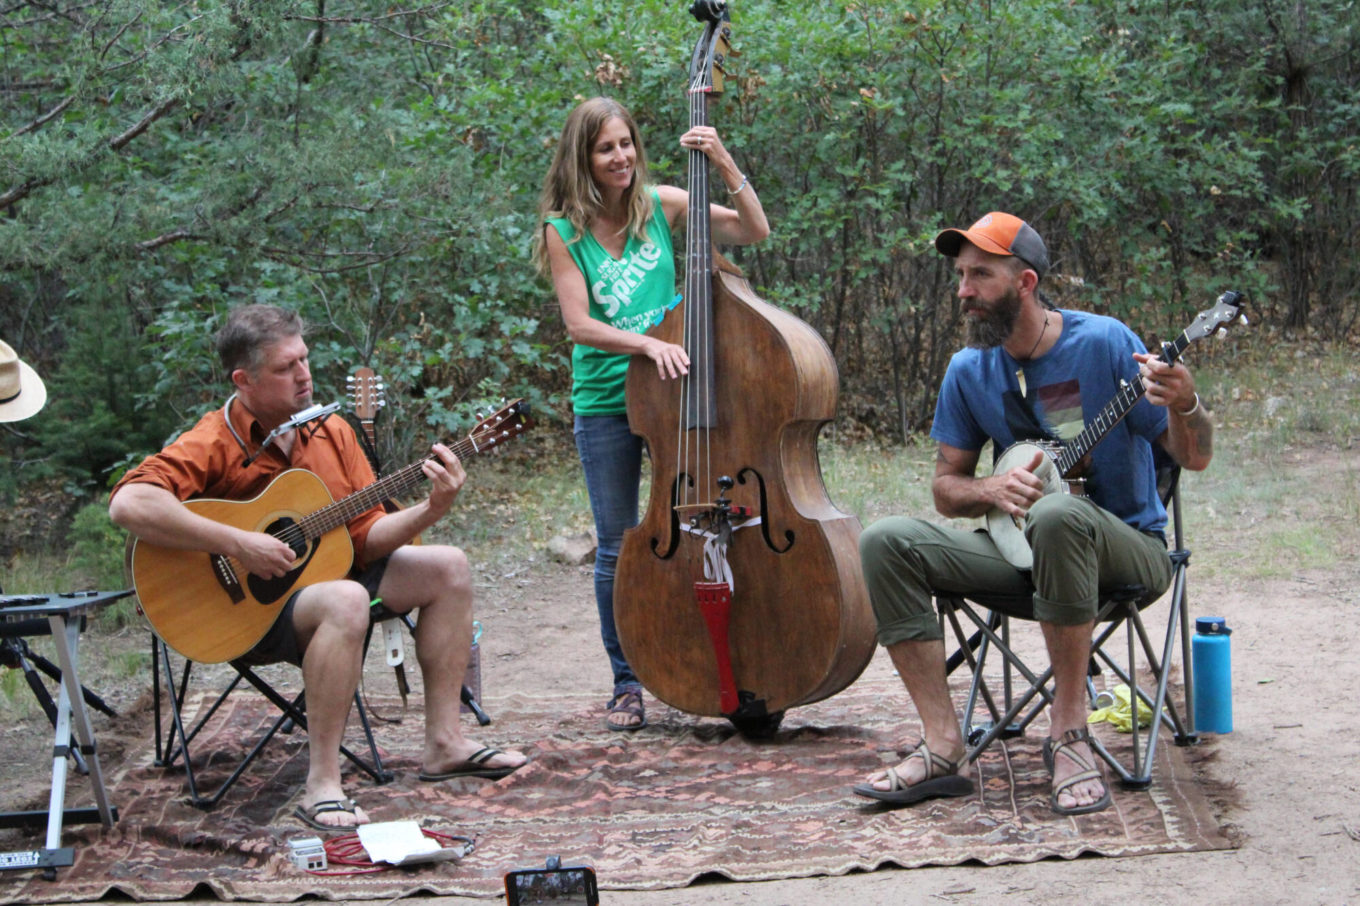 Local musicians playing during a rio chama music trip